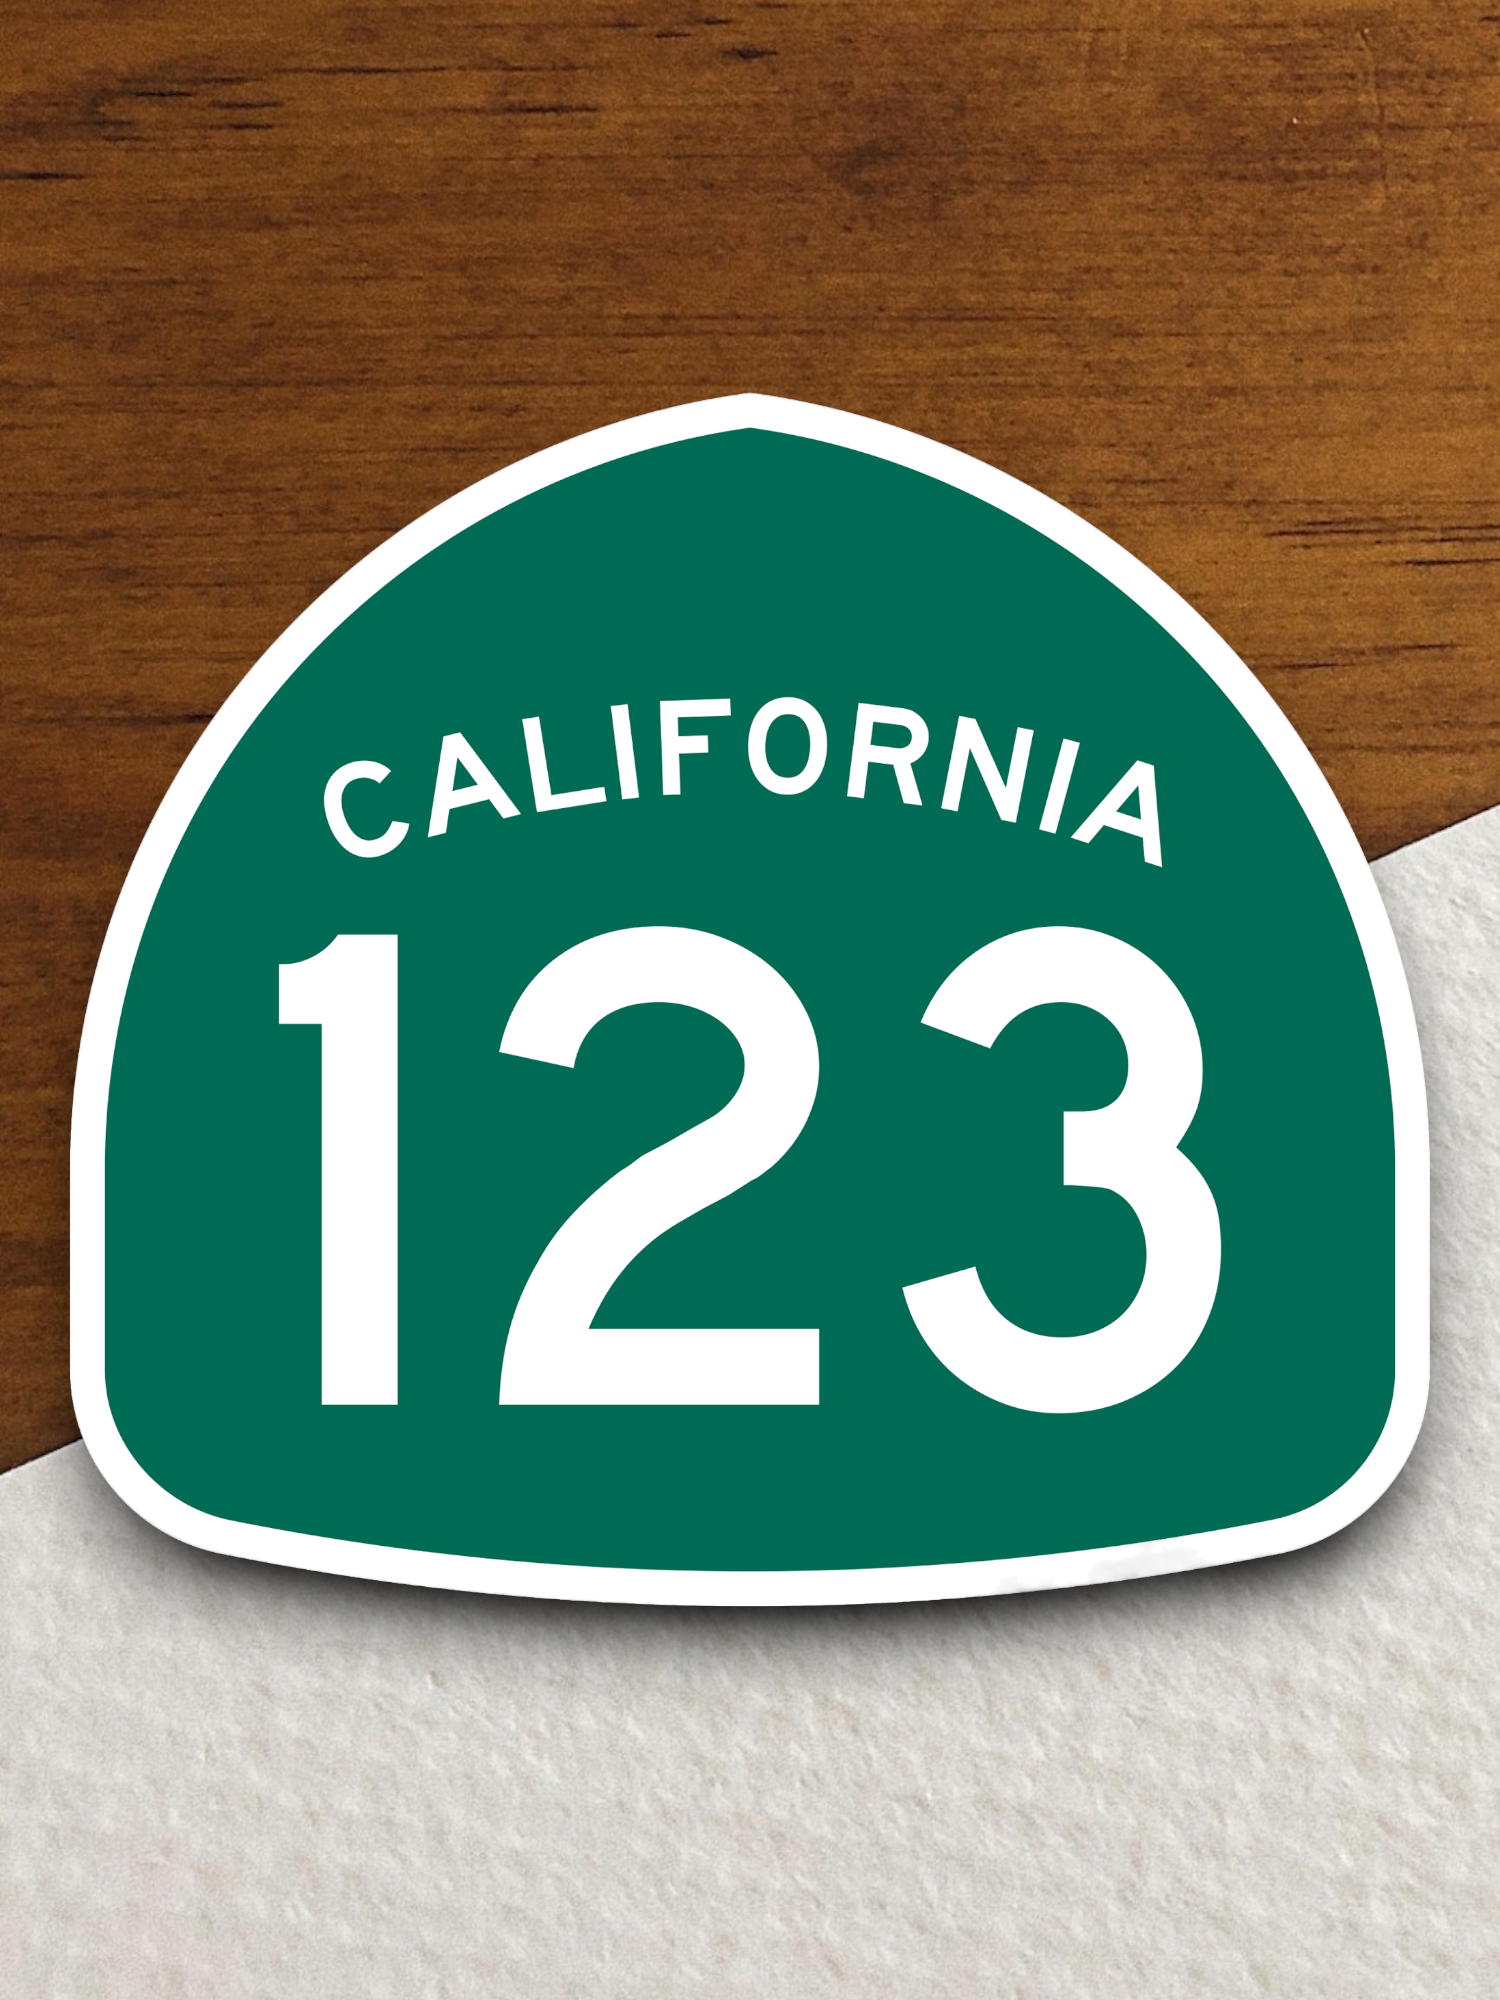 California State Route 123 Road Sign Sticker